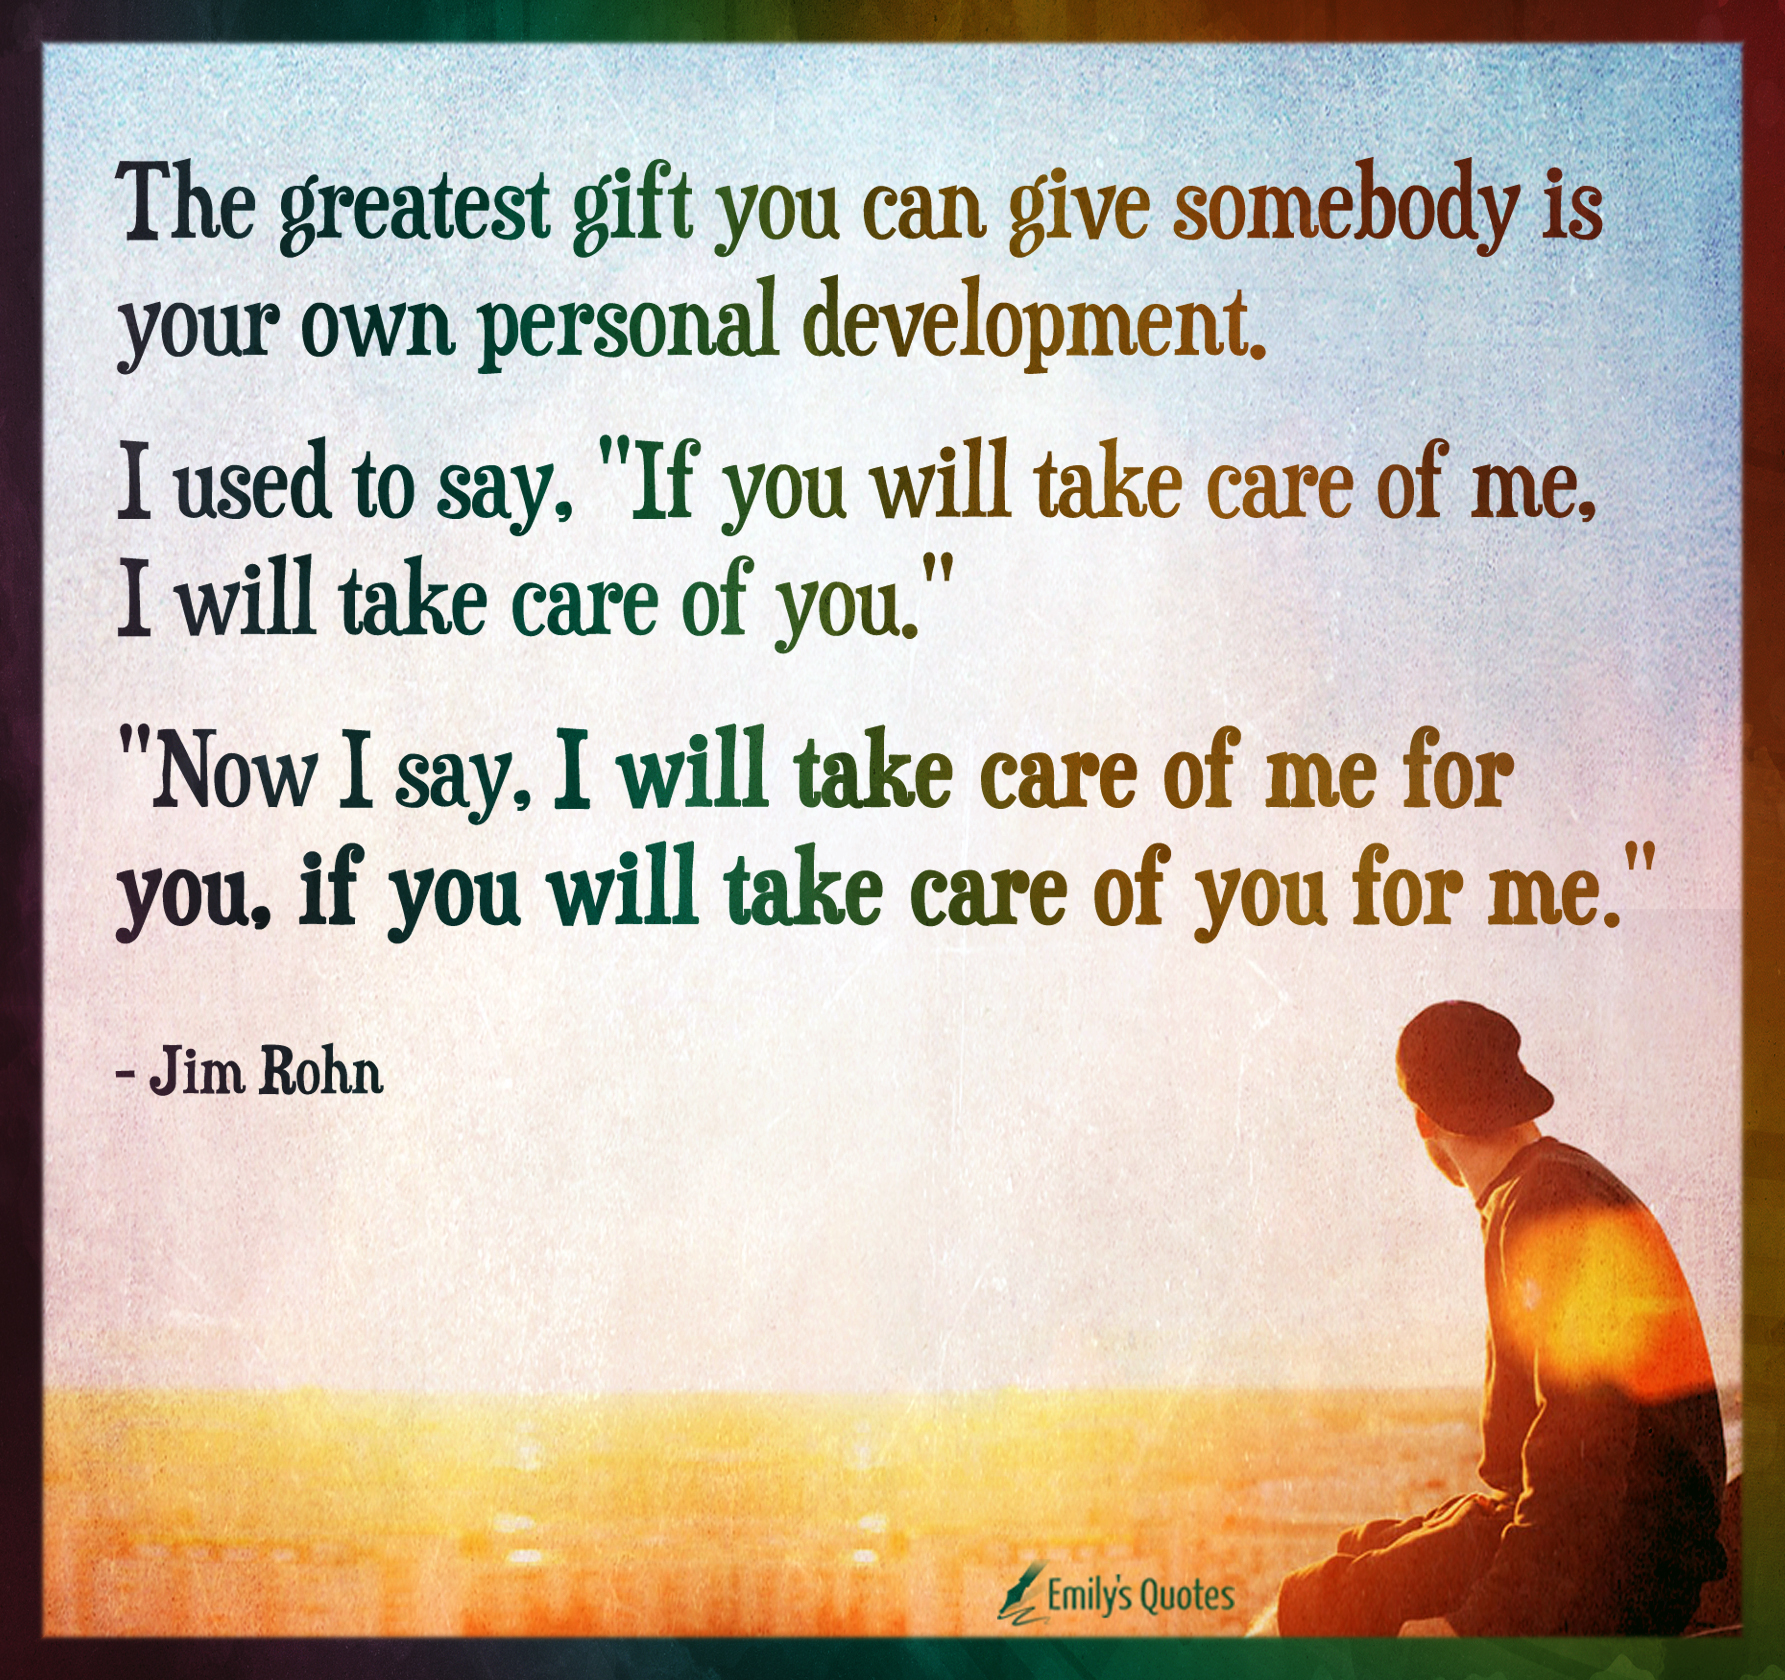 The Greatest Gift You Can Give Somebody Is Your Own Personal Development Popular Inspirational Quotes At Emilysquotes